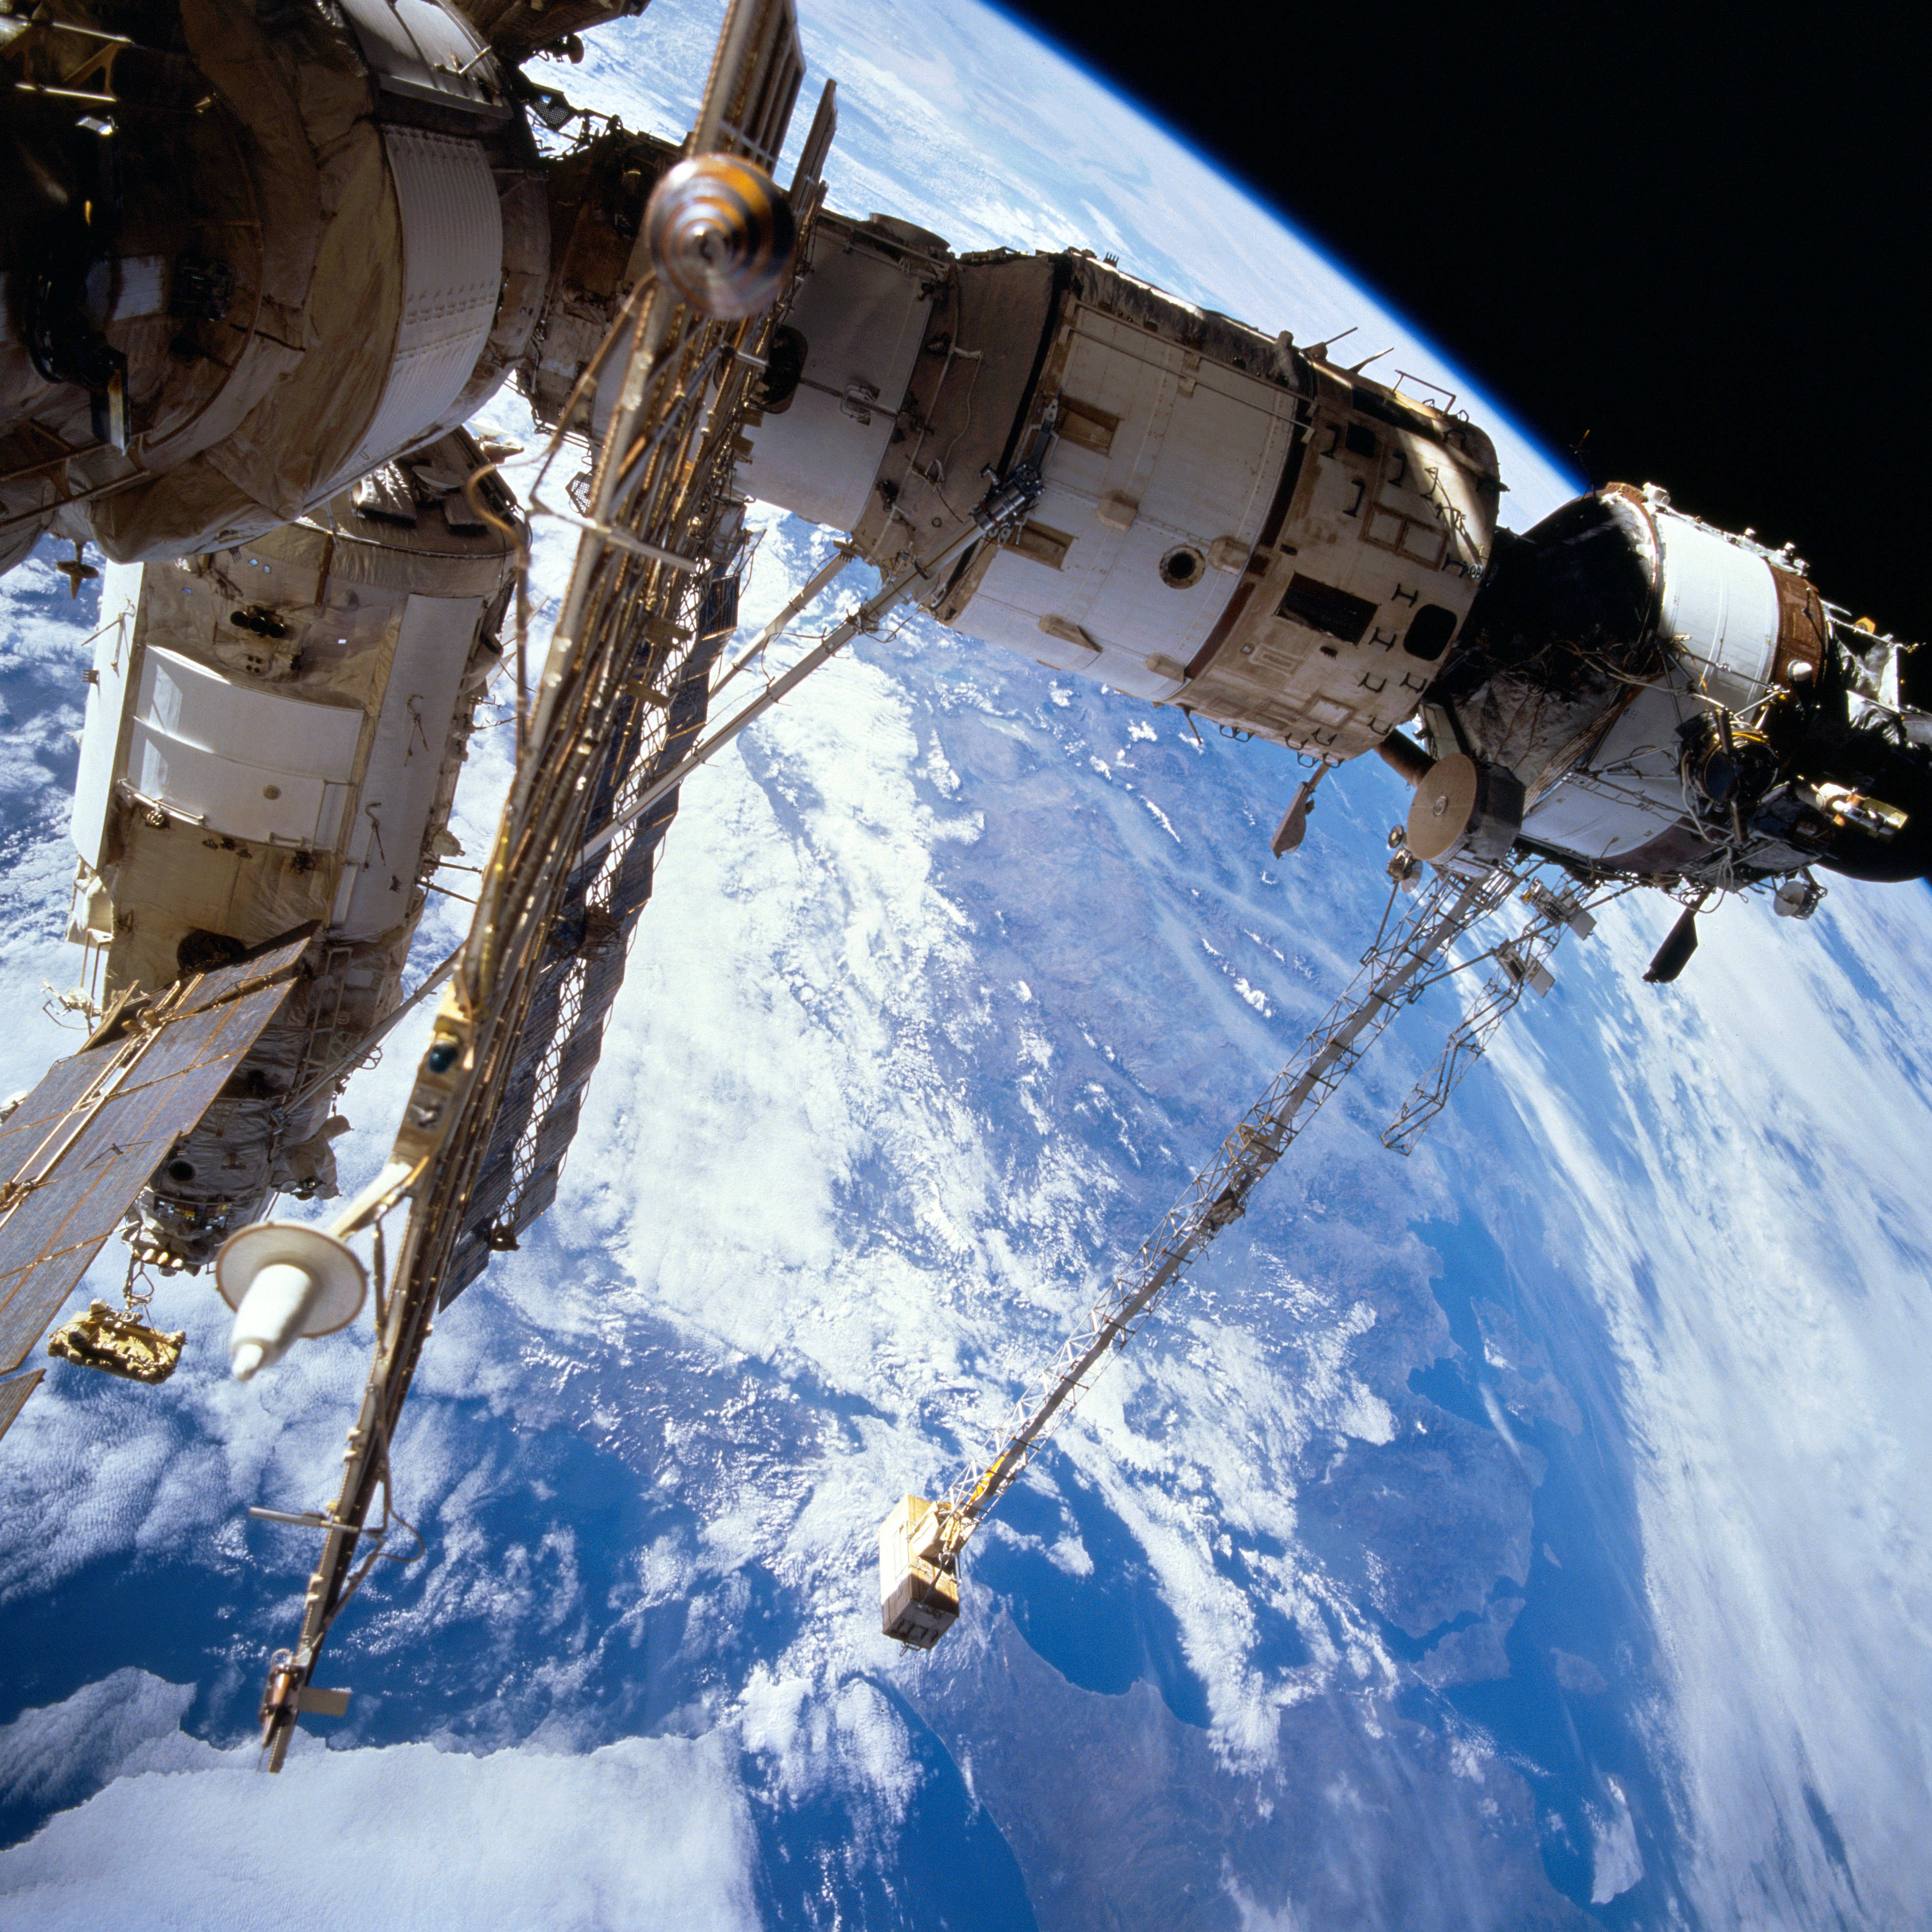 STS-76 was the fourth shuttle mission to rendezvous, and the third to dock, with Russia's Mir space station. It also marked the first shuttle mission to deliver a long-duration crew member and return to Earth with a smaller crew than that with which it launched. Photo Credit: NASA, via Joachim Becker/SpaceFacts.de